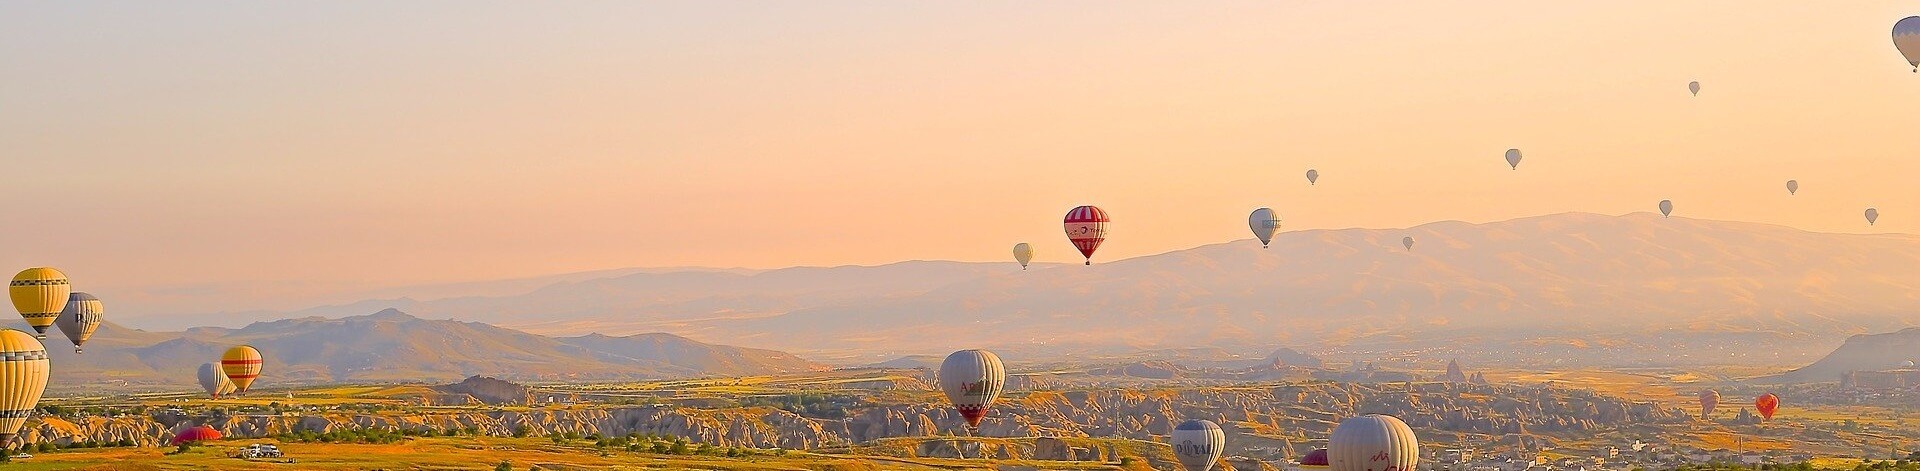 turkey citizenship by investment can be the gate to experiencing hot air ballooning over Cappadocia